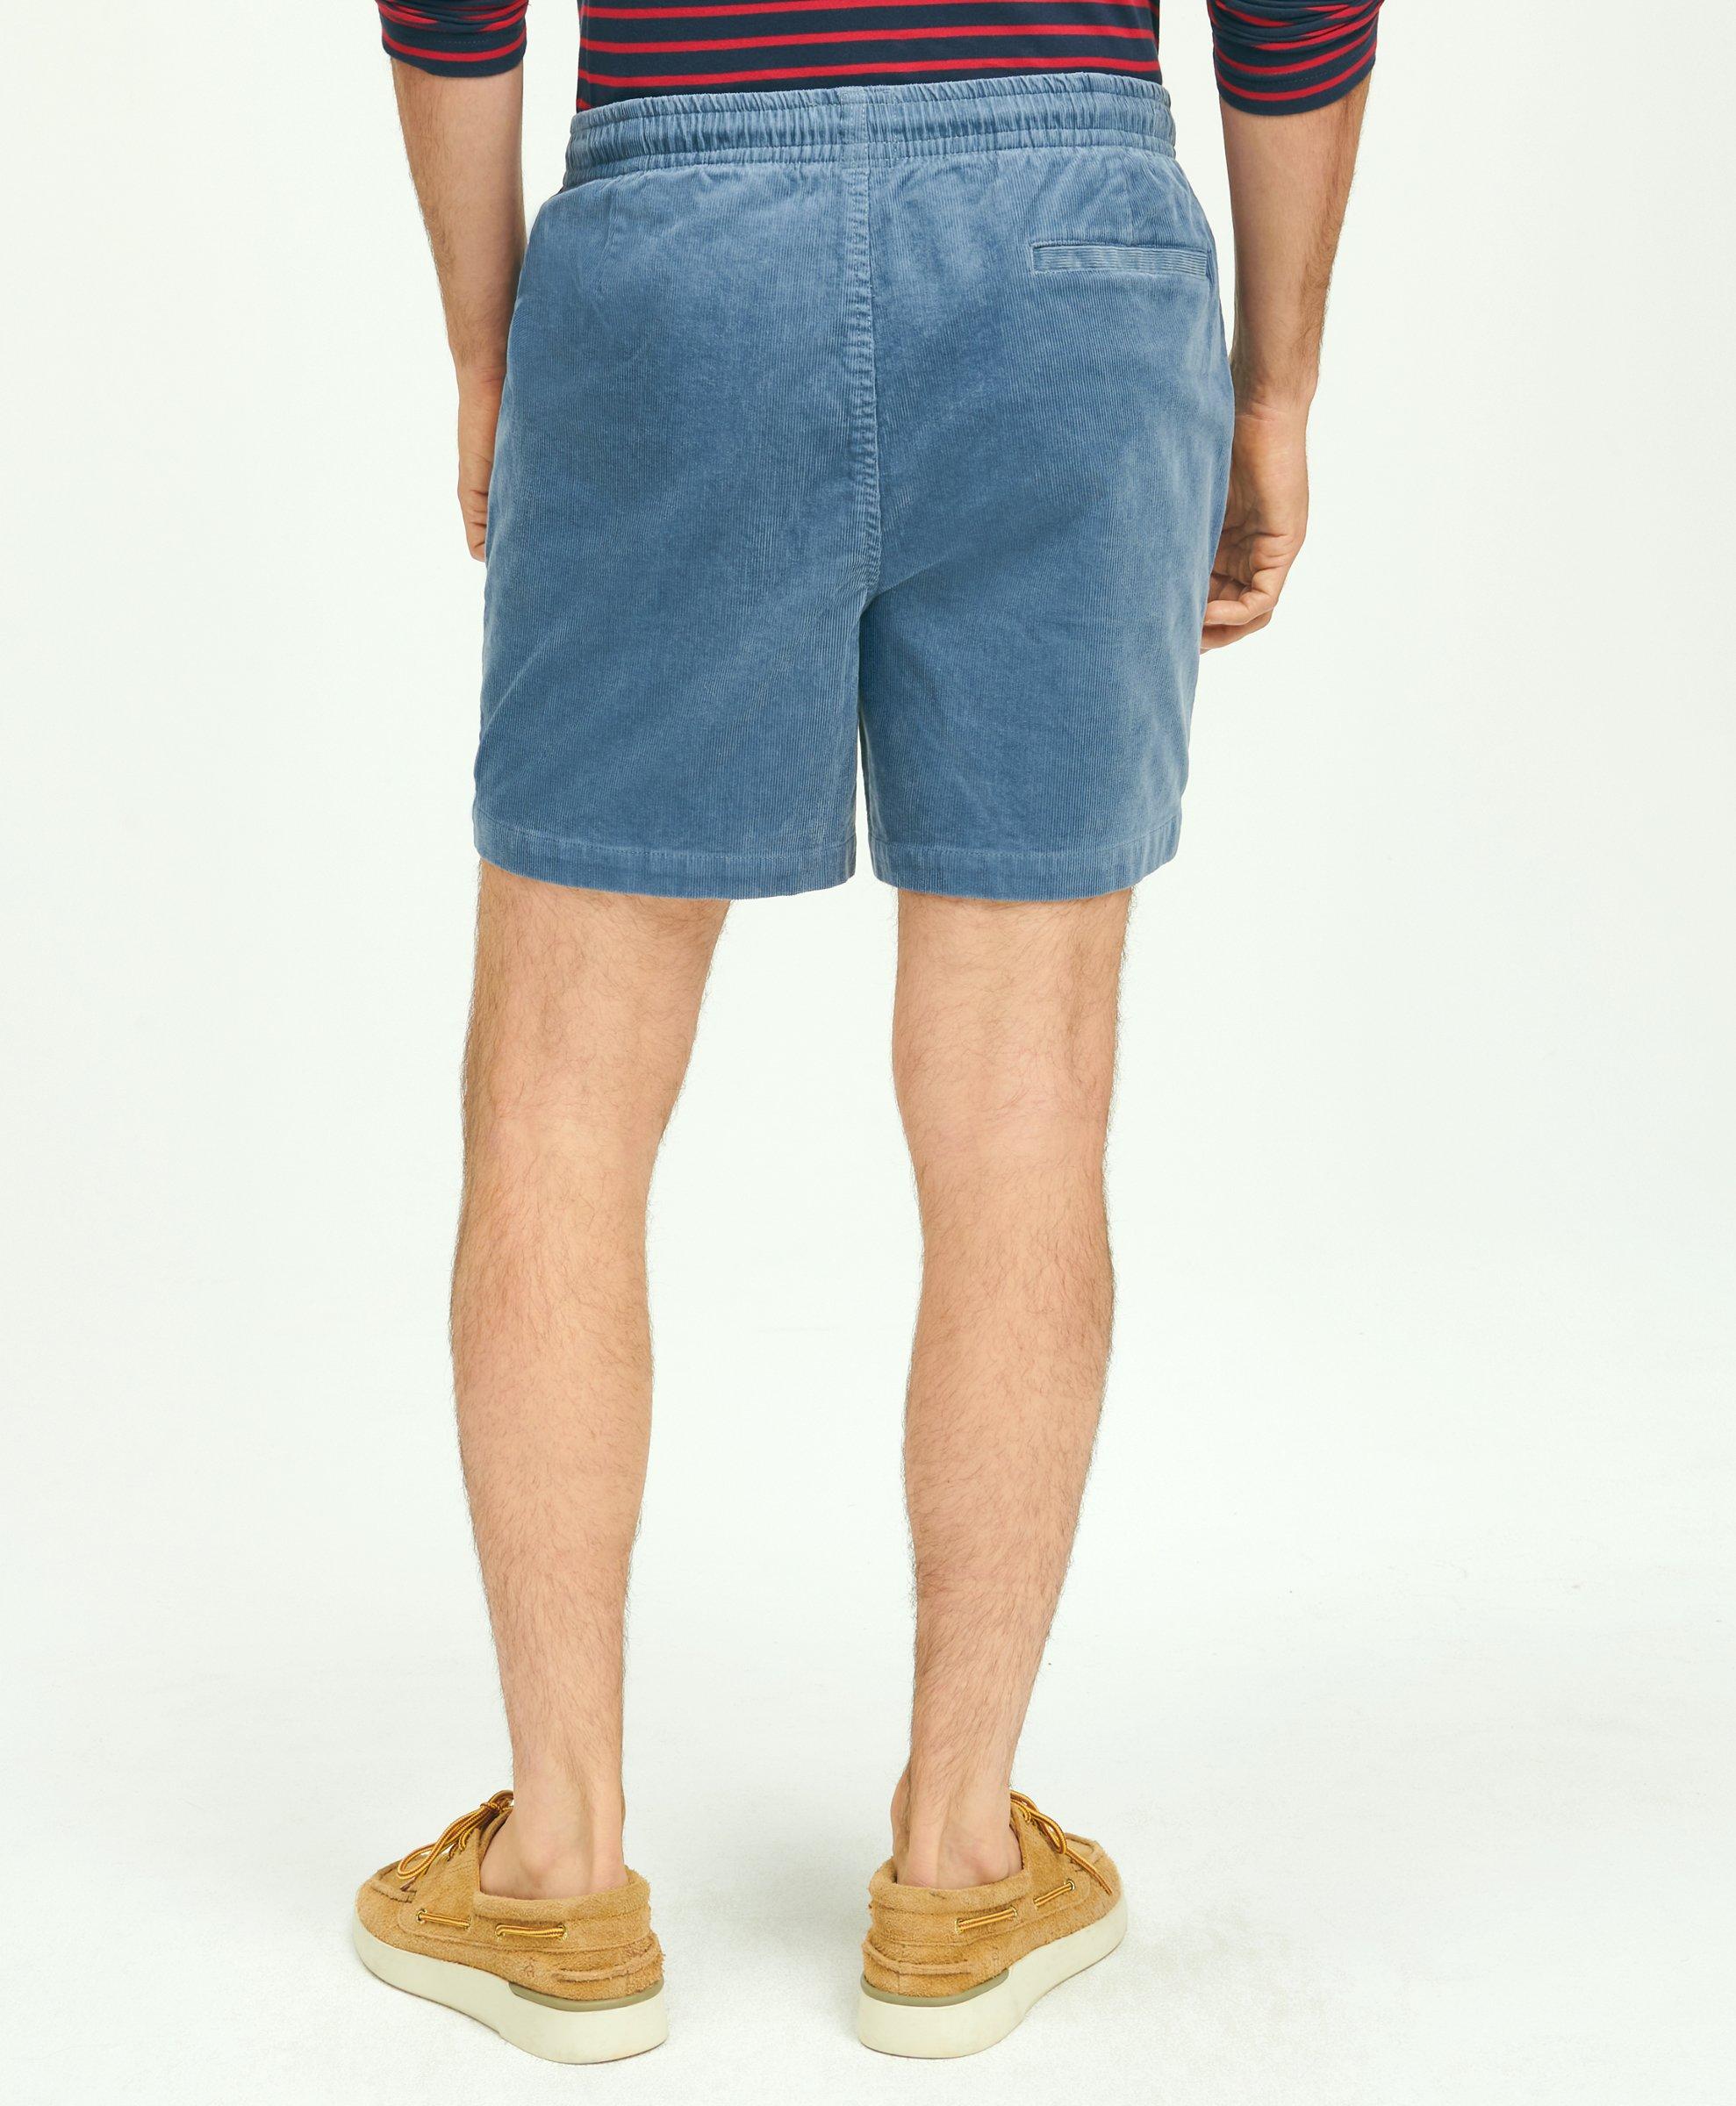 Jeans shorts for men with waist drawstring